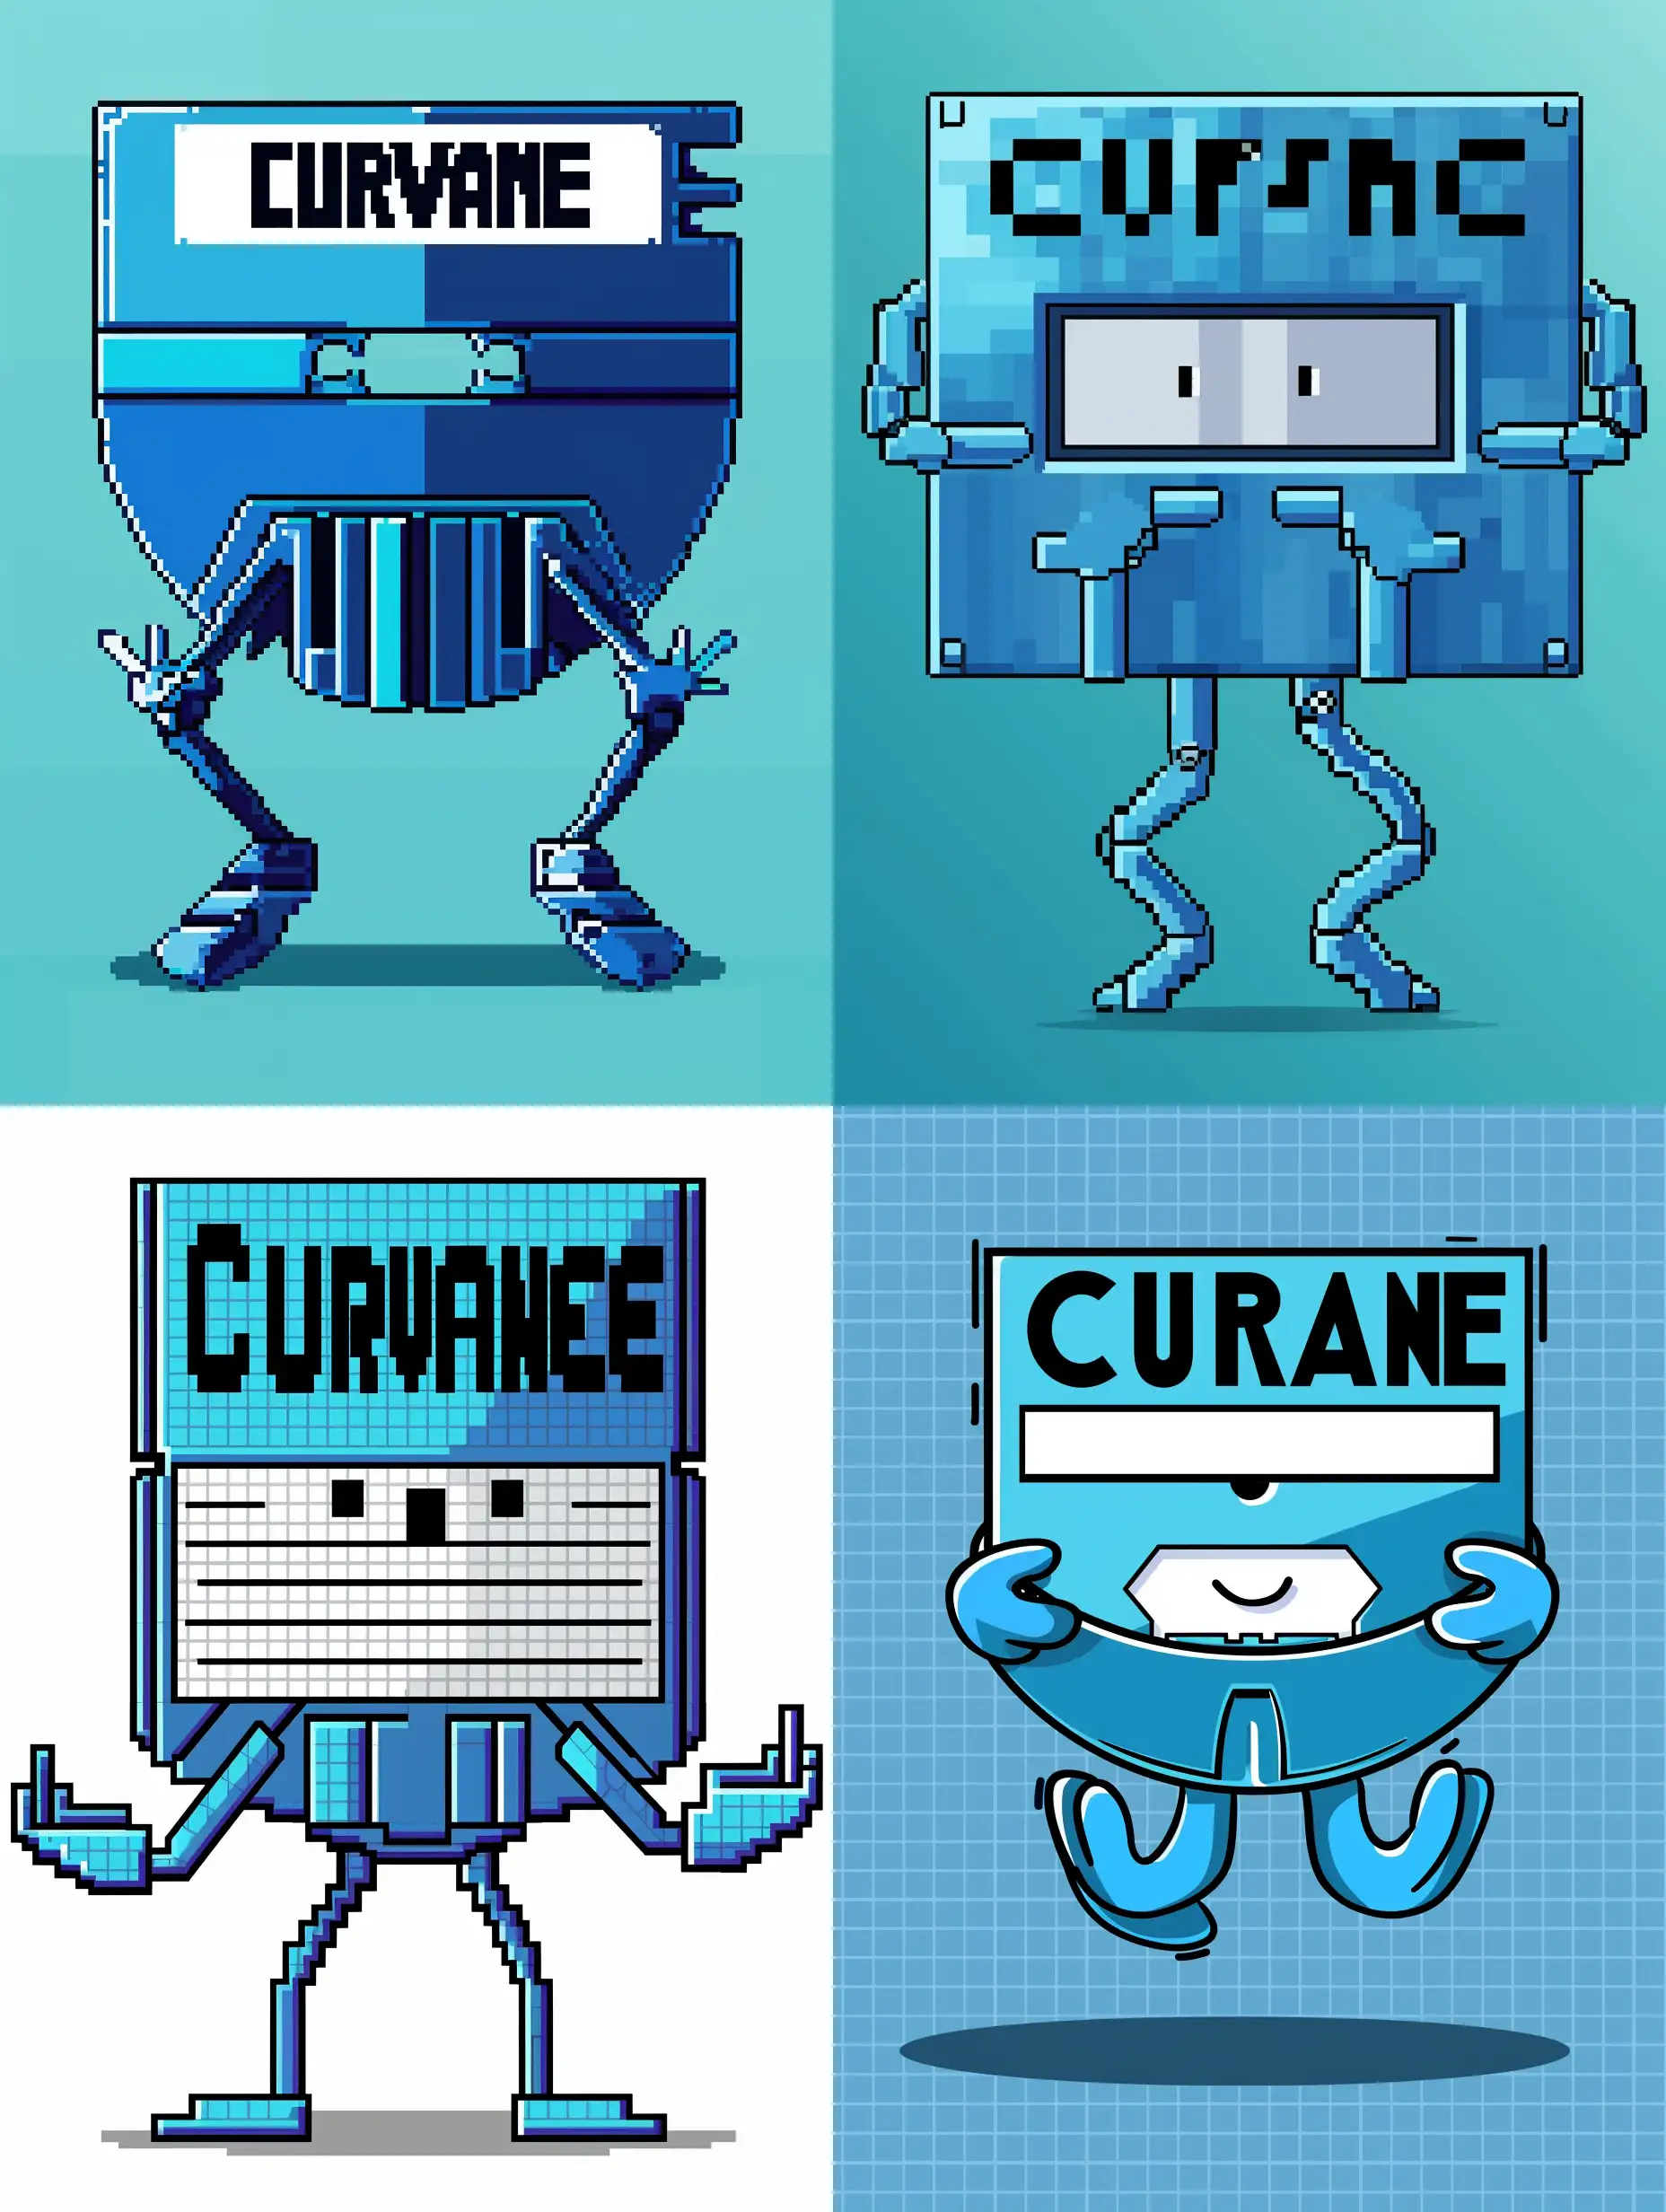 Cheerful-Pixel-Art-Personified-Floppy-Disk-with-Cartoonish-Features-and-Blue-Color-Tones